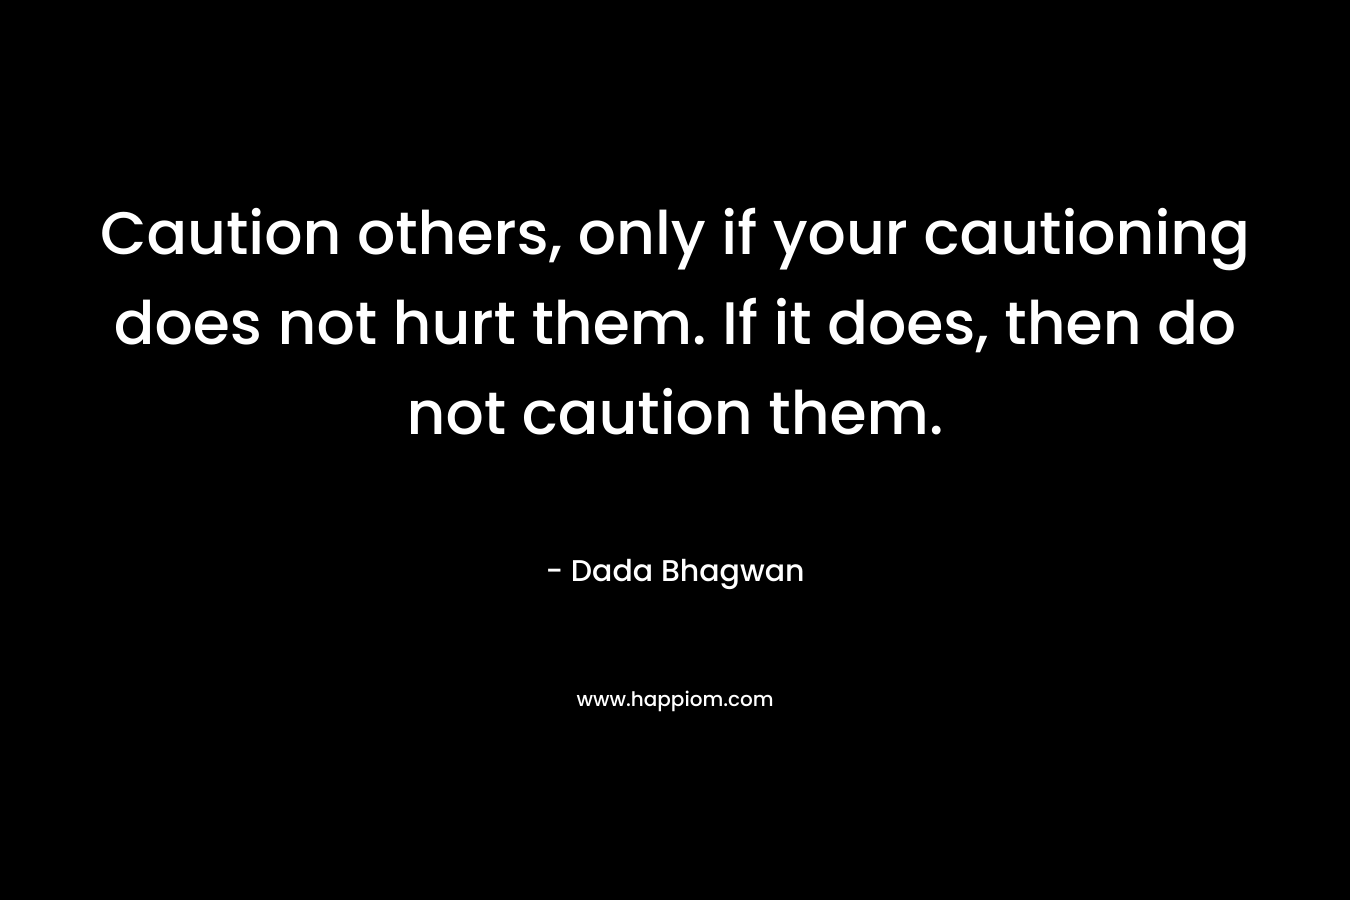 Caution others, only if your cautioning does not hurt them. If it does, then do not caution them.